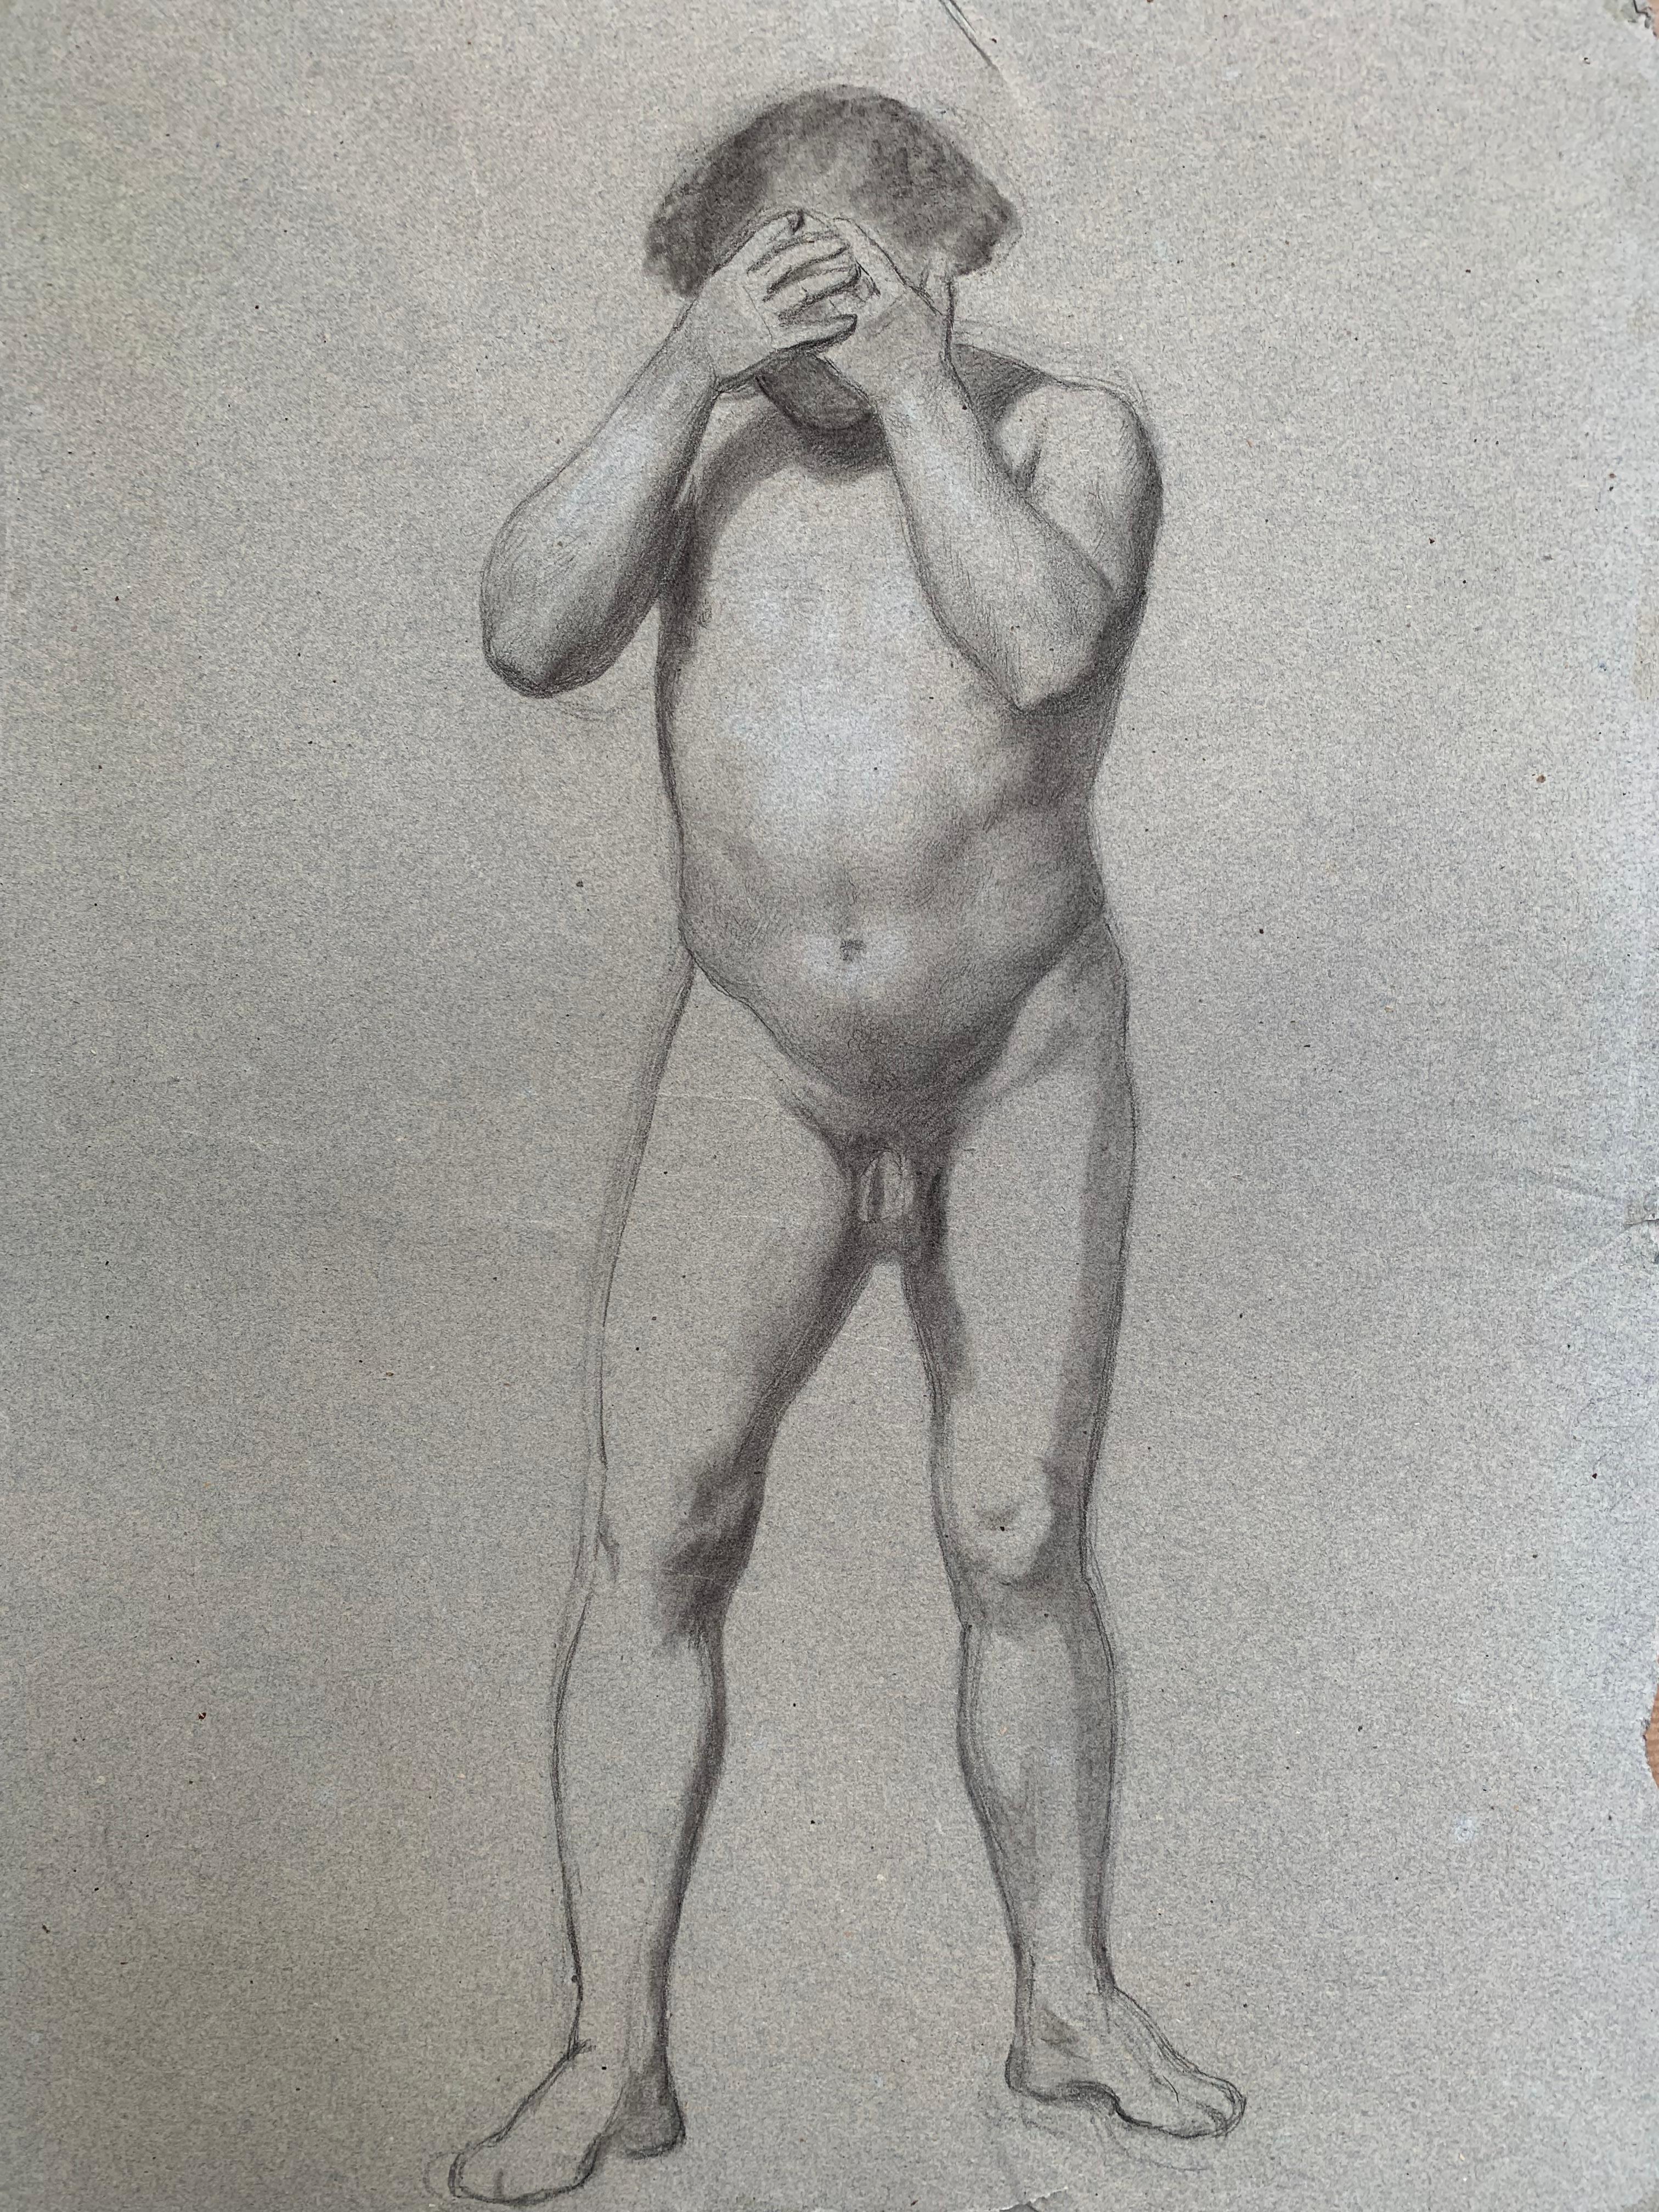 Enrico Reffo Nude - Preparatory anatomical study for the figure of a man with hands on his face.